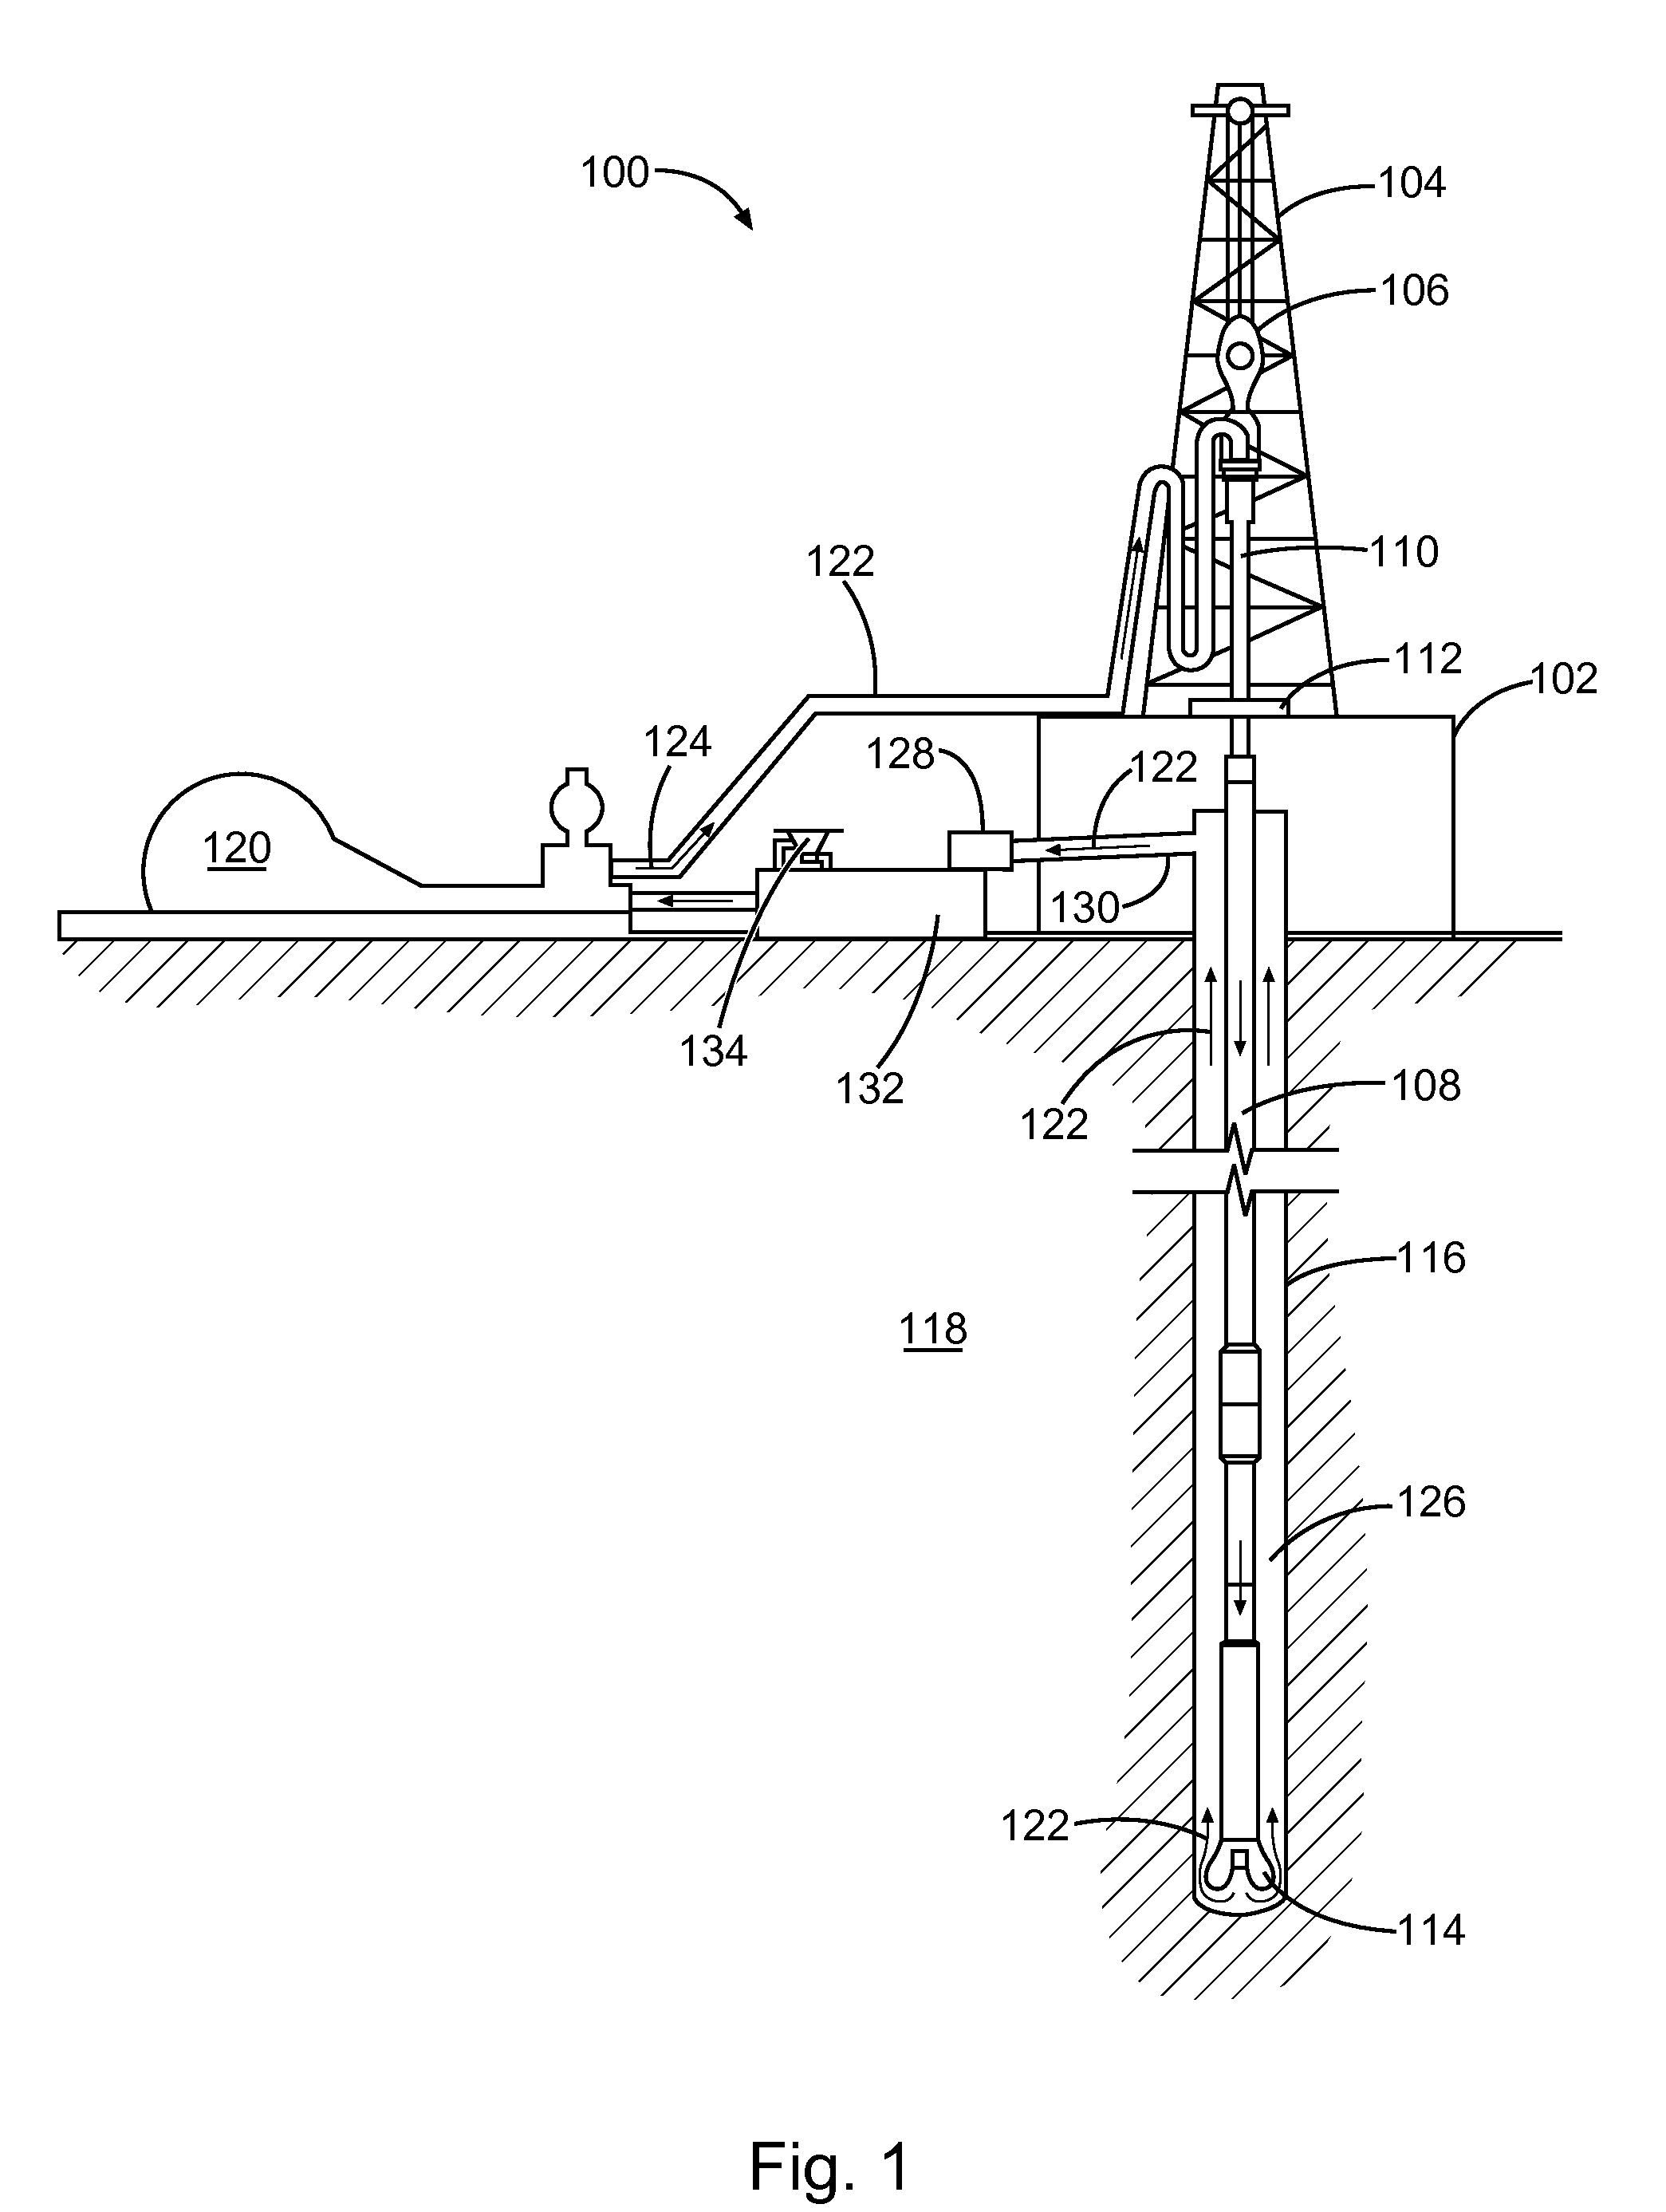 Hydrophobically and hydrophilically modified polysaccharides and methods of using the same for treatment of a subterranean formation